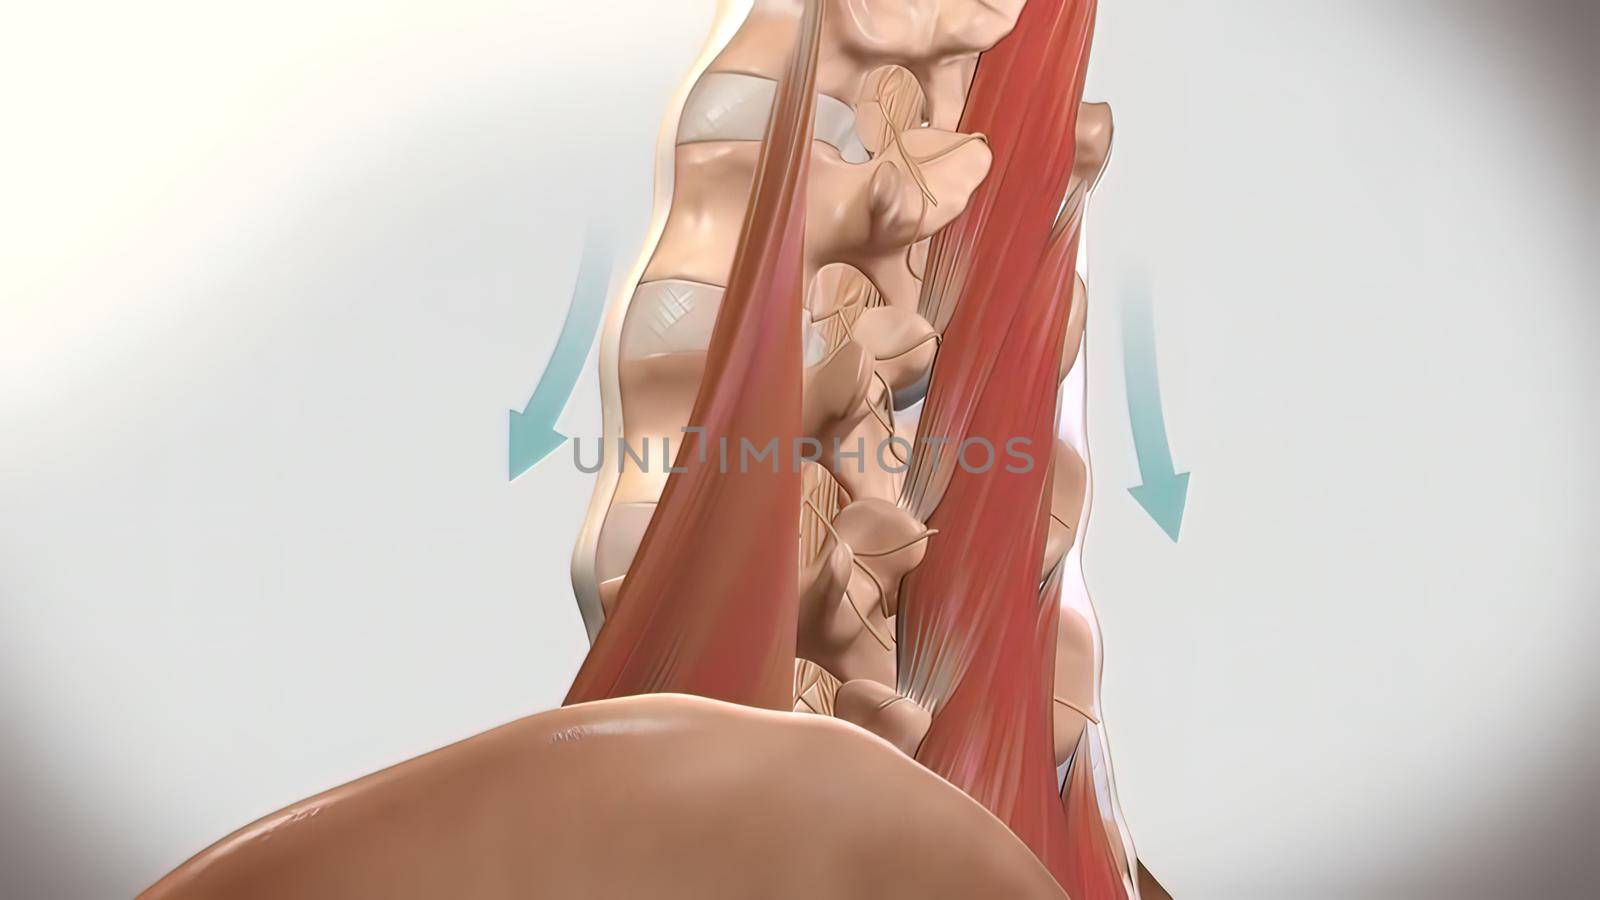 Chronic Low Back Pain. showing pain in the lower back by creativepic